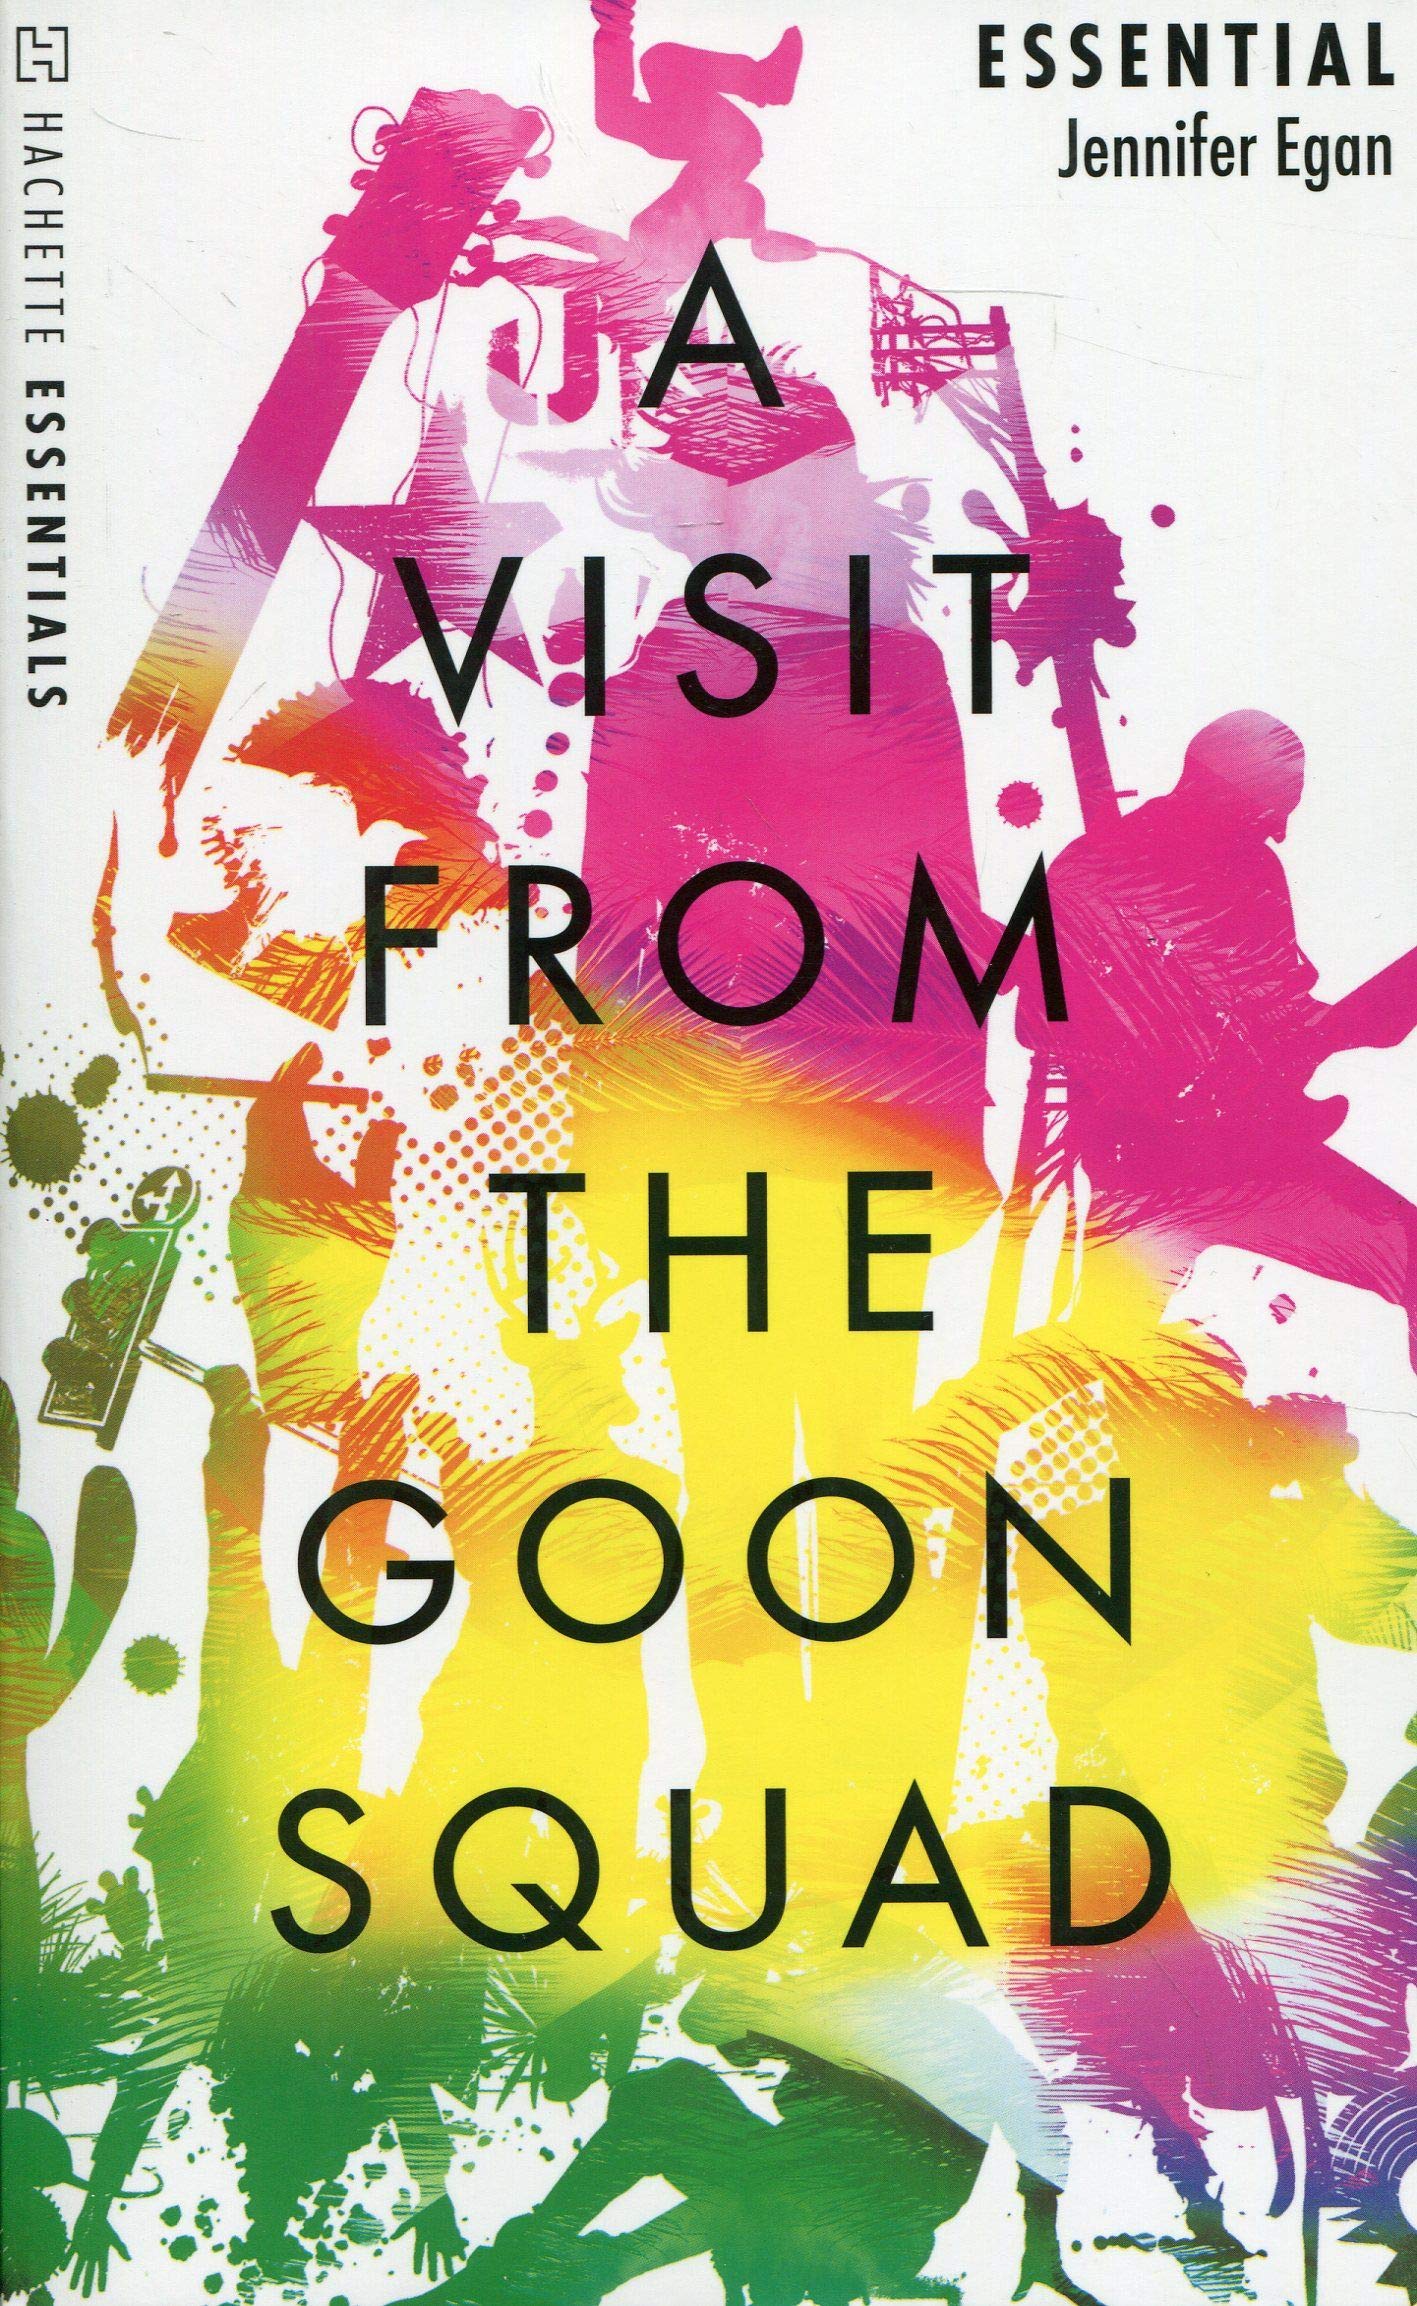 a visit from the goon squad summary